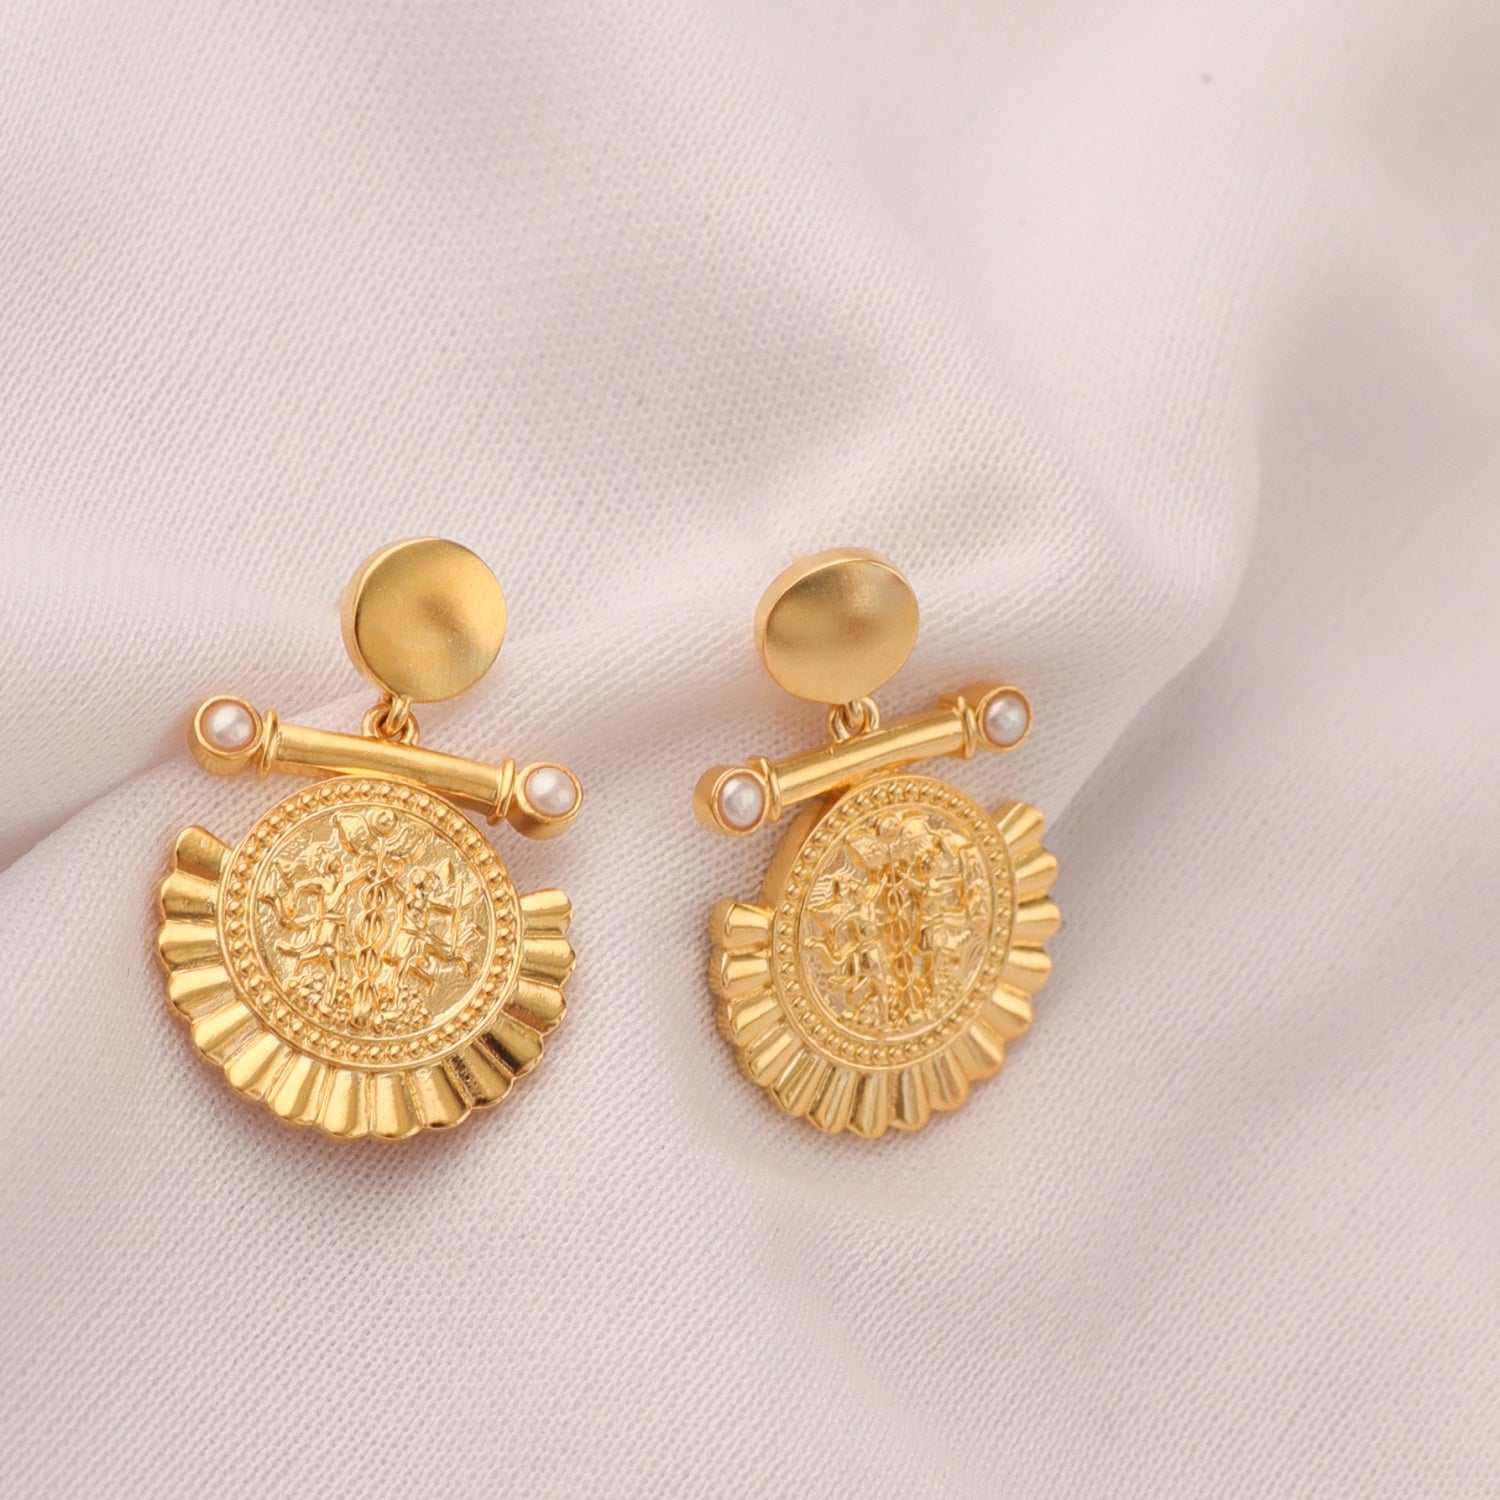 Discover more than 160 lakshmi coin earrings gold super hot